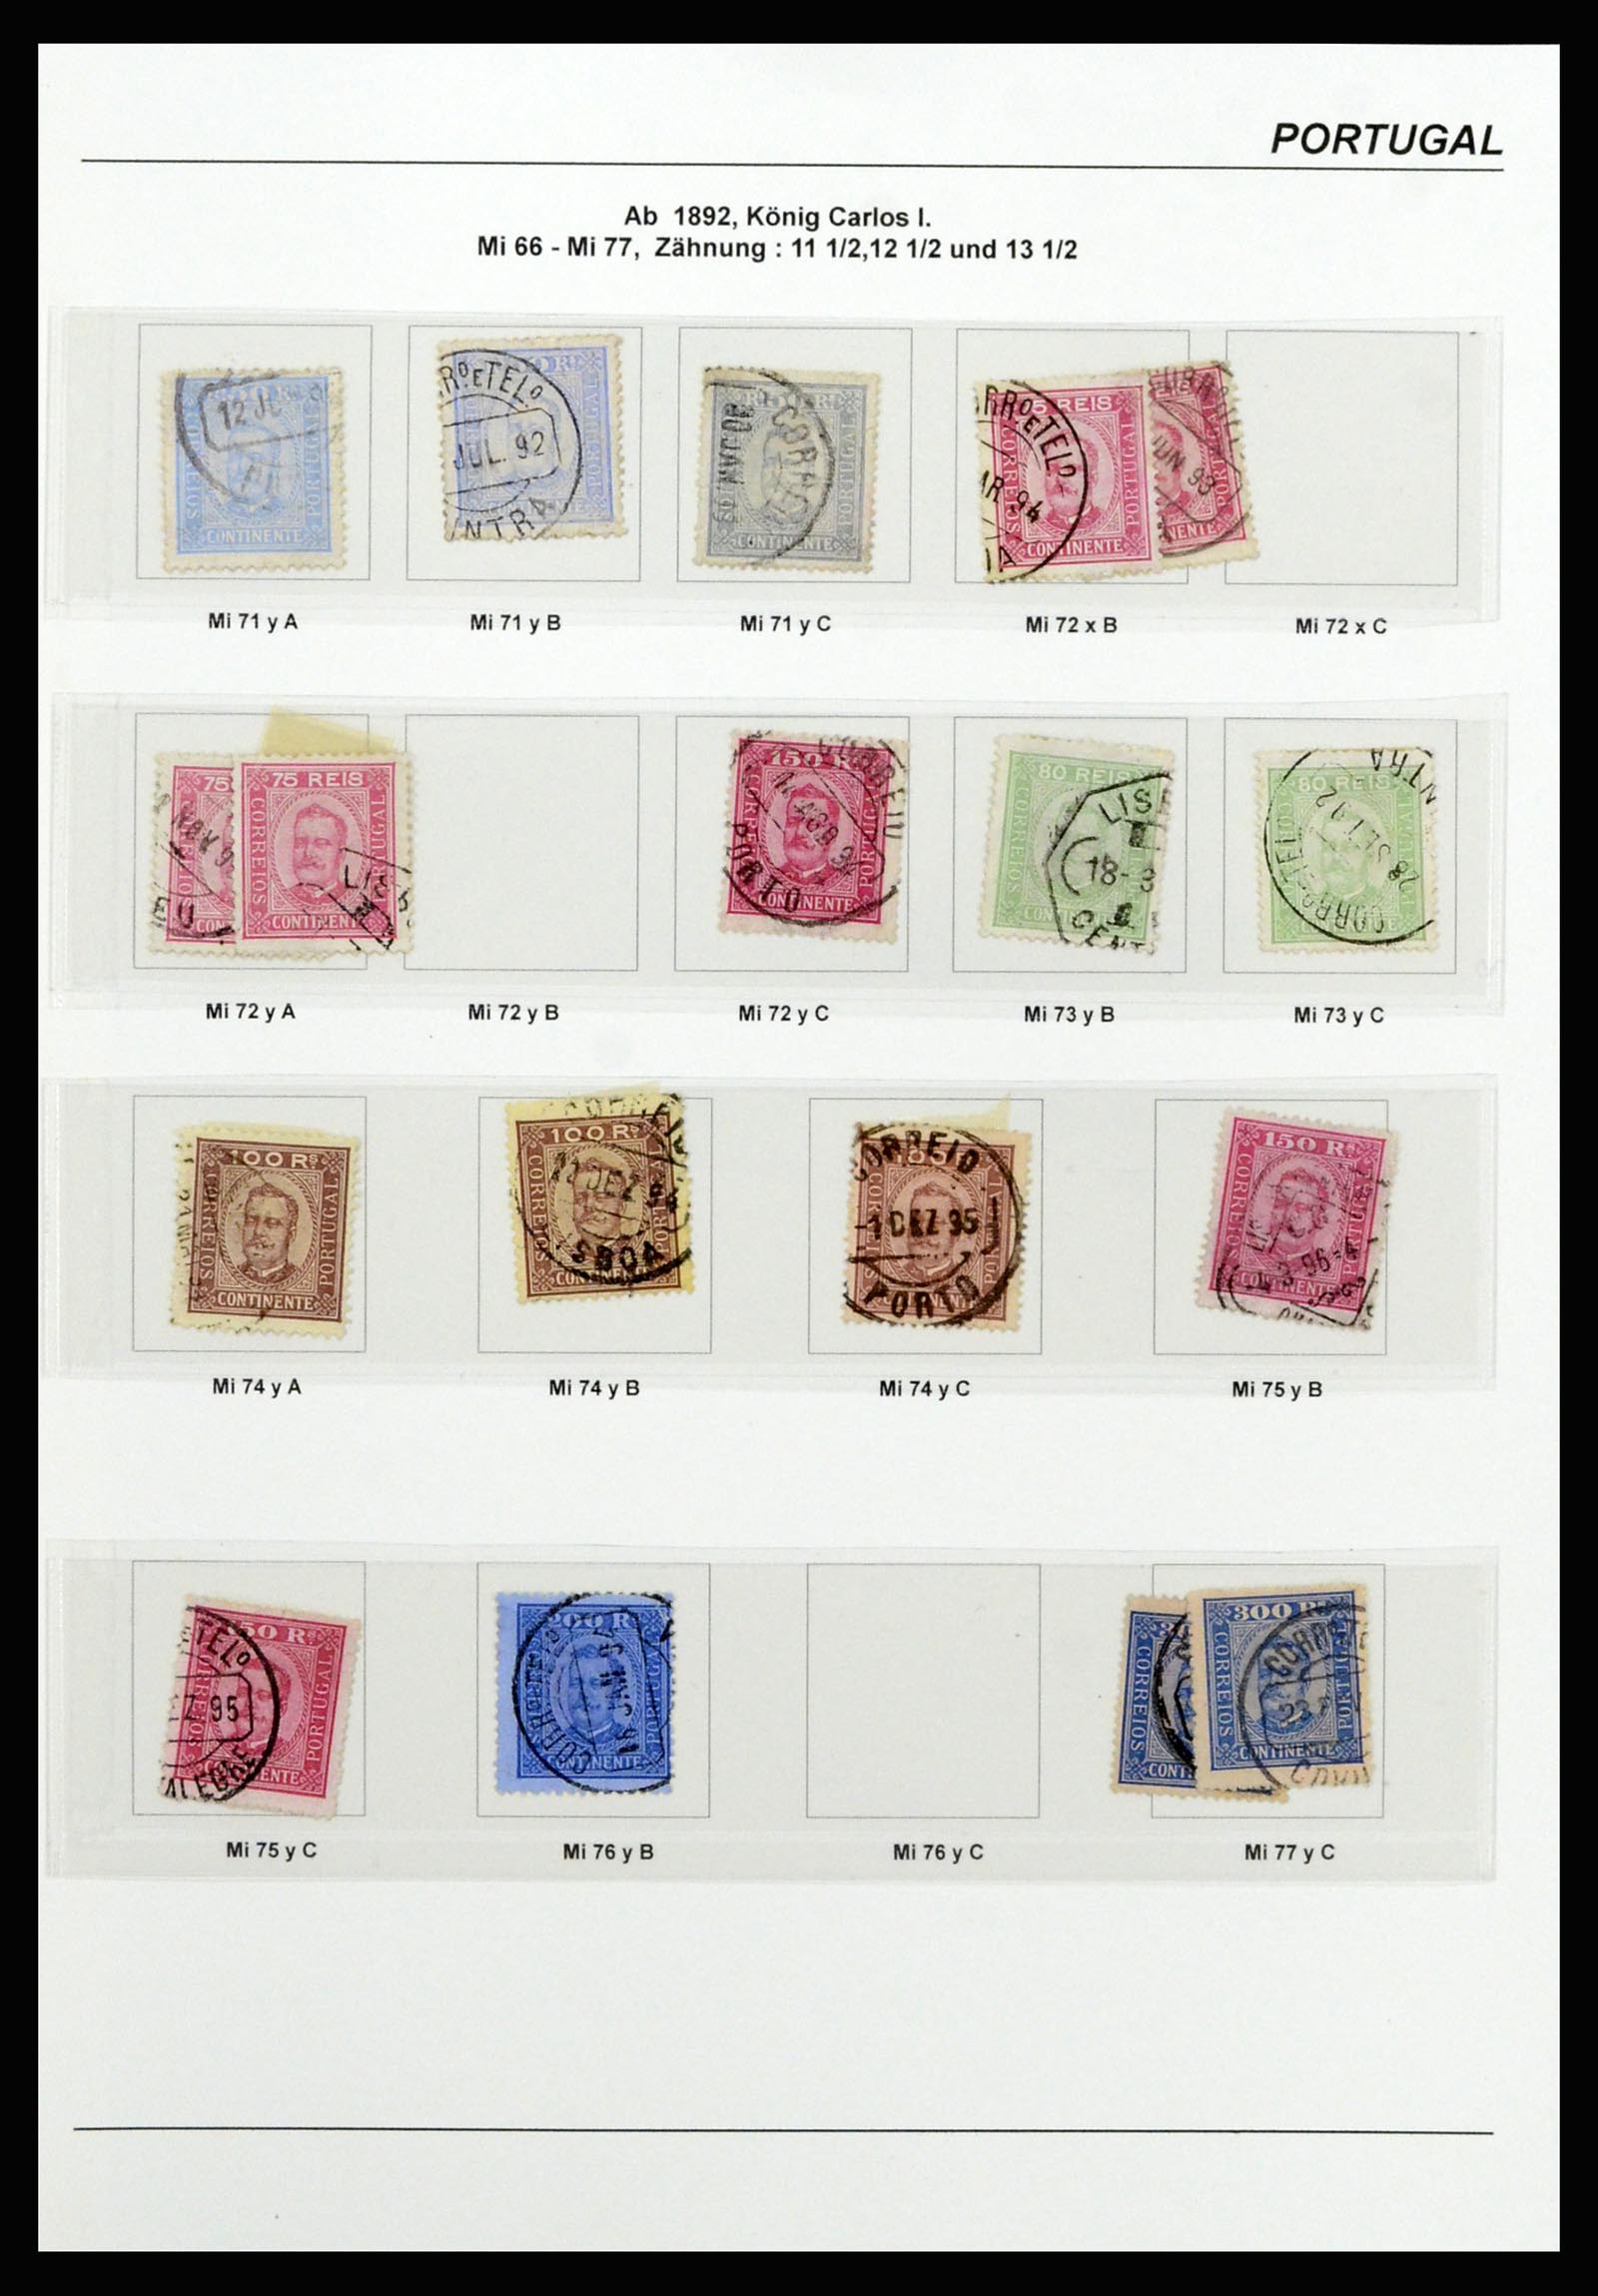 37133 048 - Stamp collection 37133 Portugal 1853-1893.